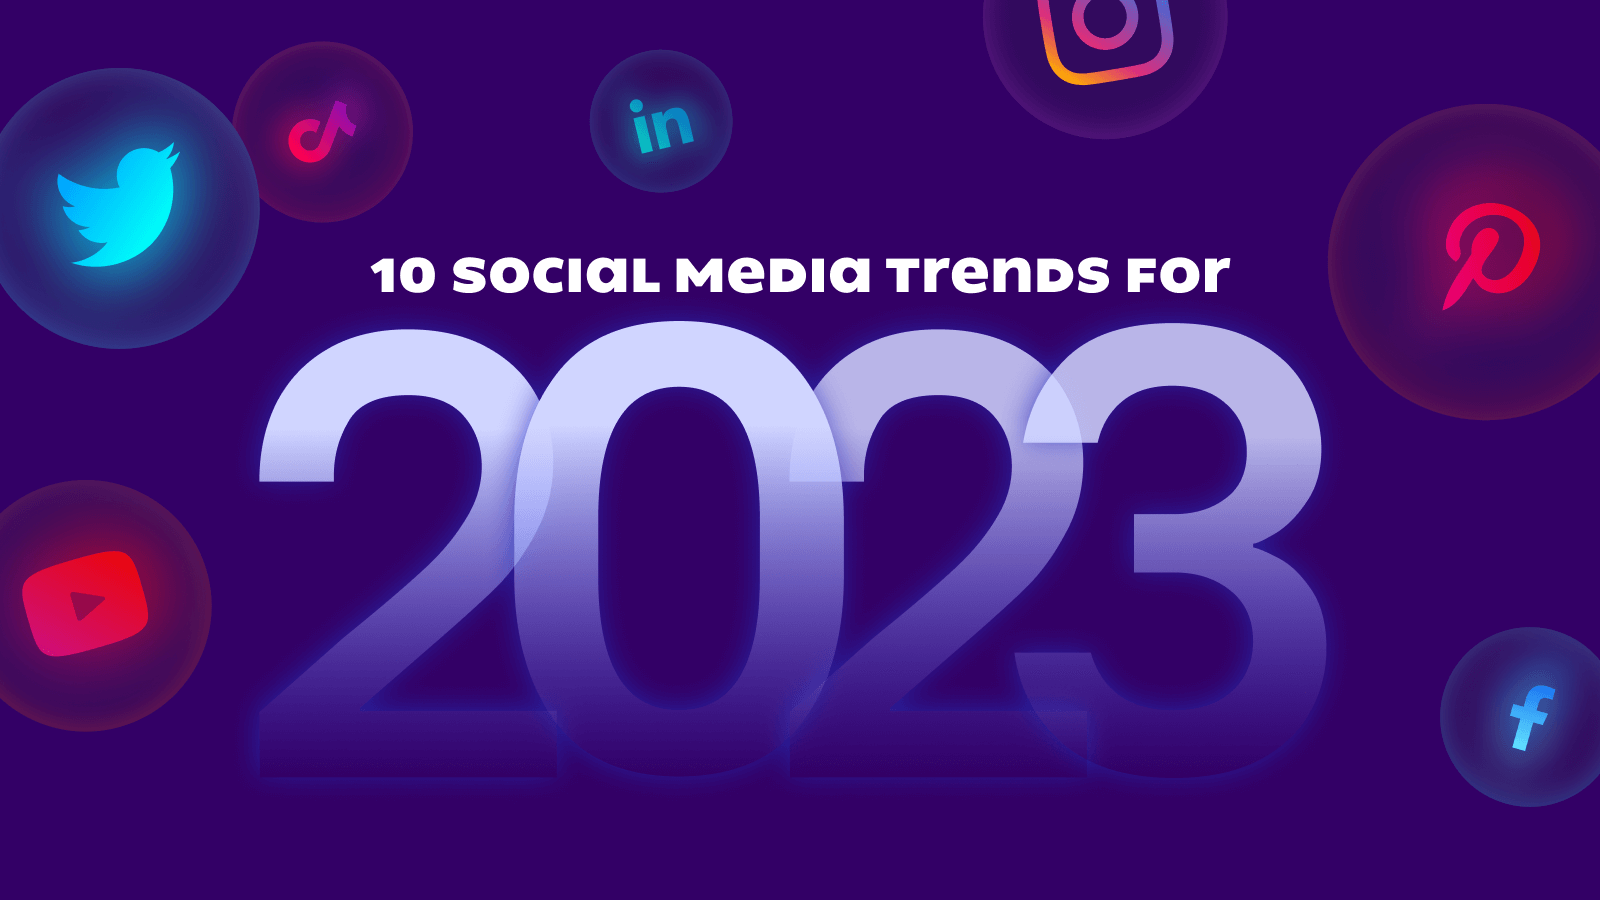 How do you keep up with latest social media trends?